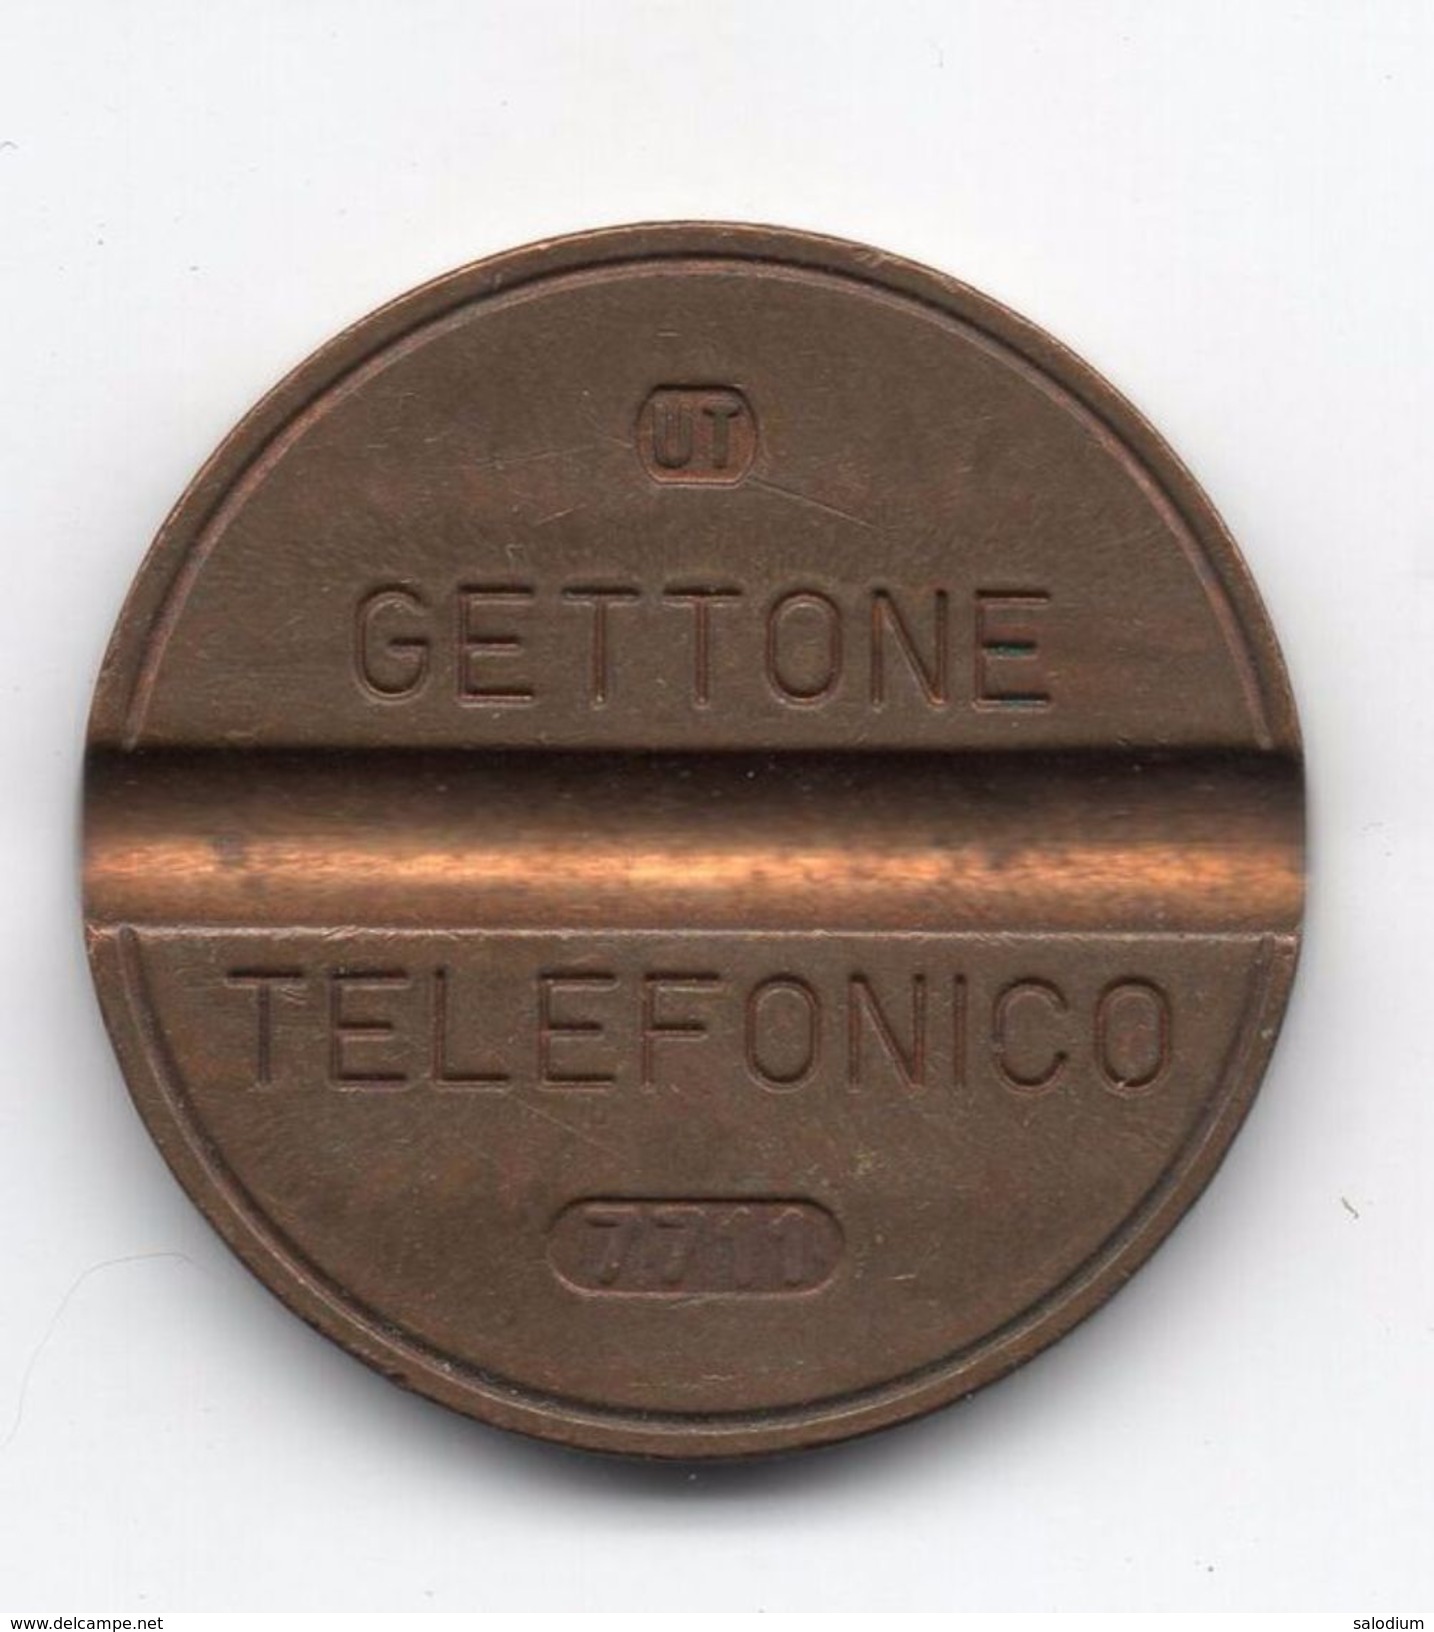 Gettone Telefonico 7711 Token Telephone - (Id-770) - Professionals/Firms